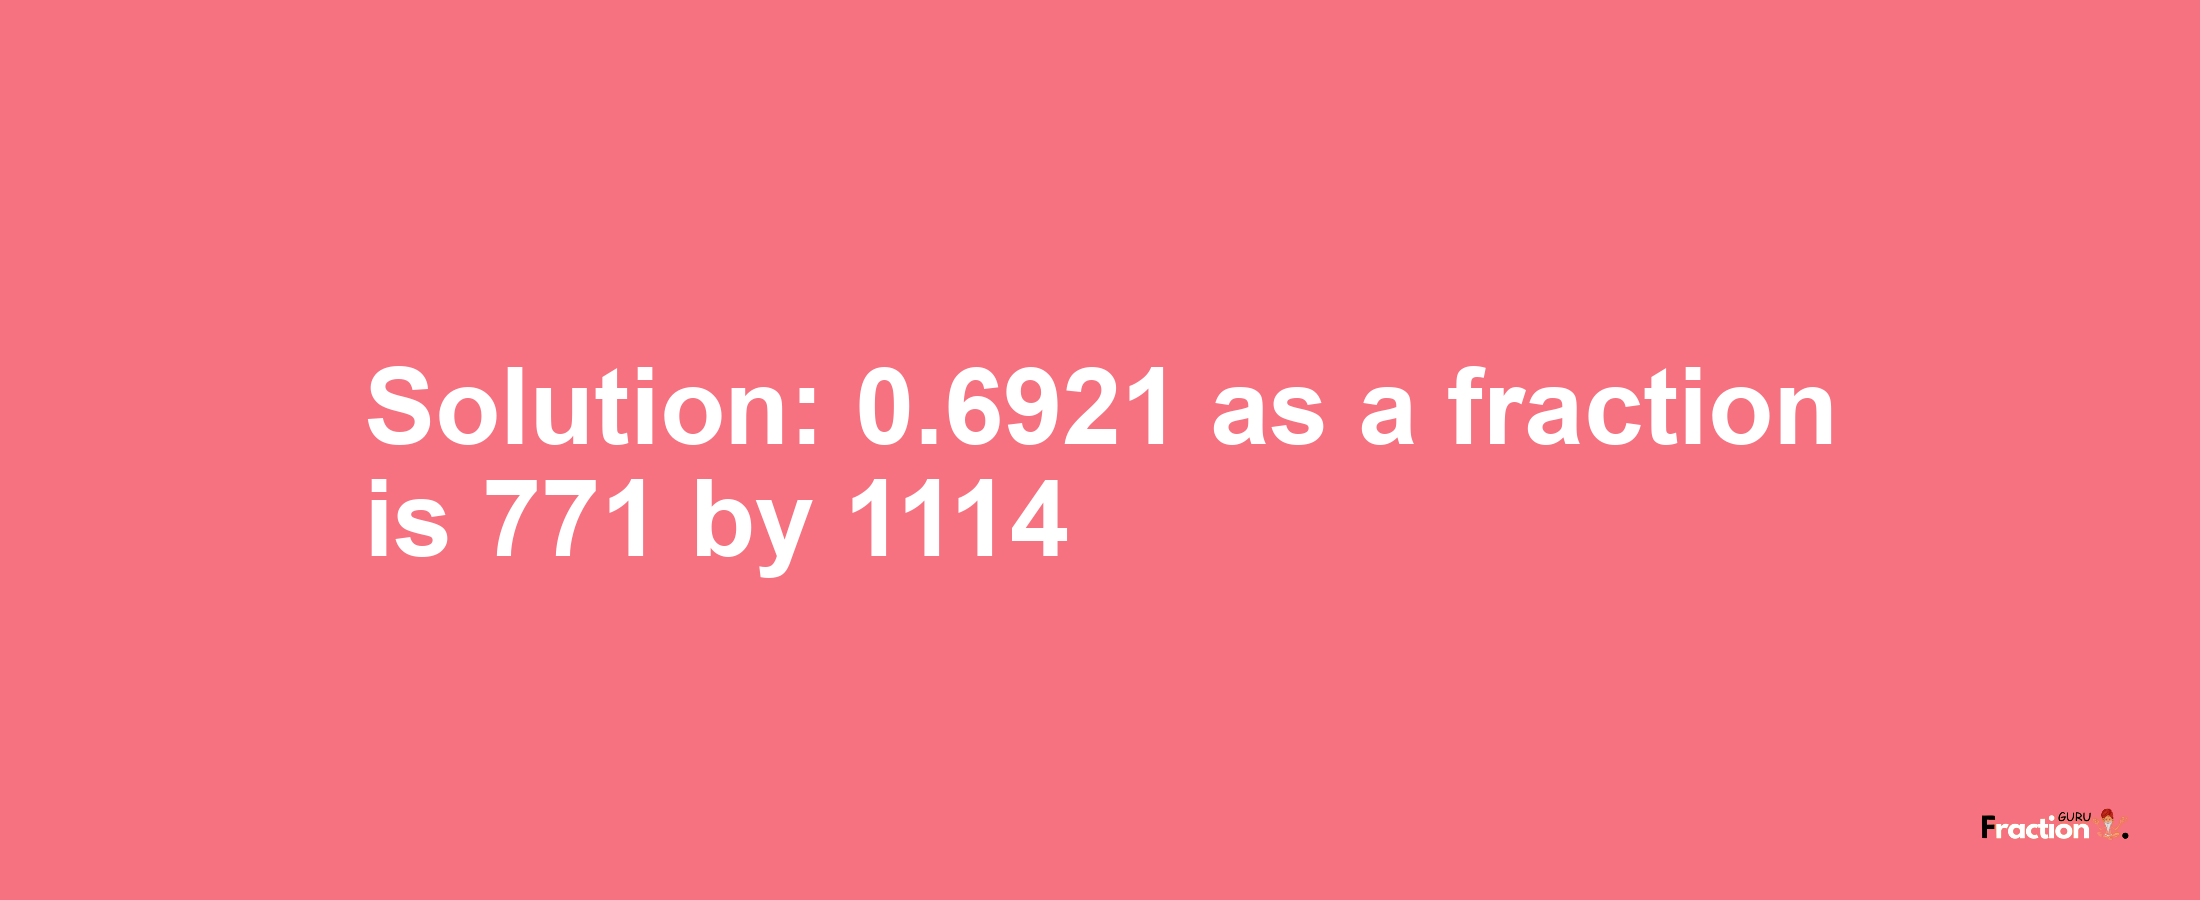 Solution:0.6921 as a fraction is 771/1114